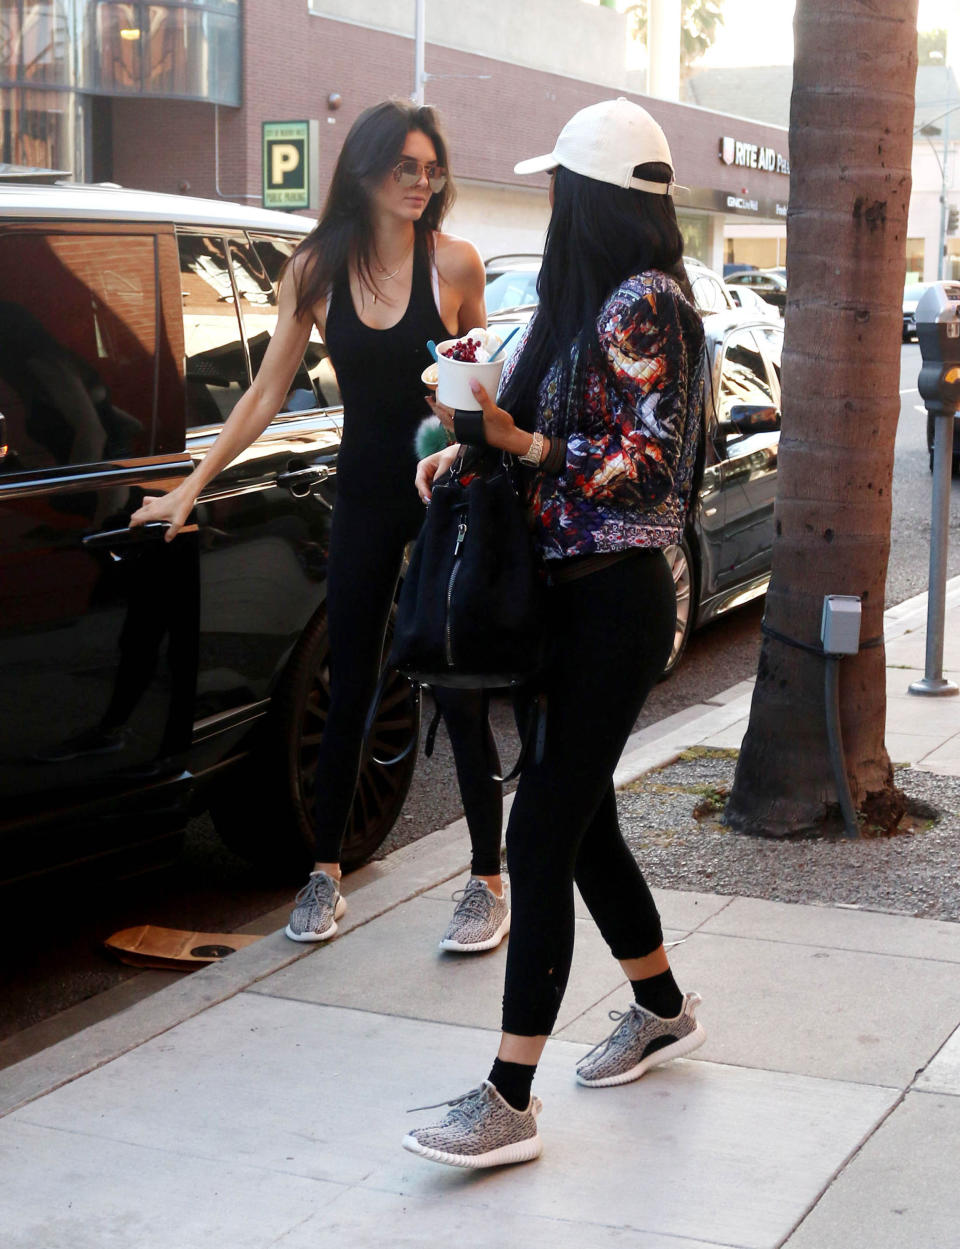 LOS ANGELES, CA - JUNE 20:  Kendall Jenner and Kylie Jenner are seen on June 20, 2015 in Los Angeles, California.  (Photo by JMA/Star Max/GC Images)